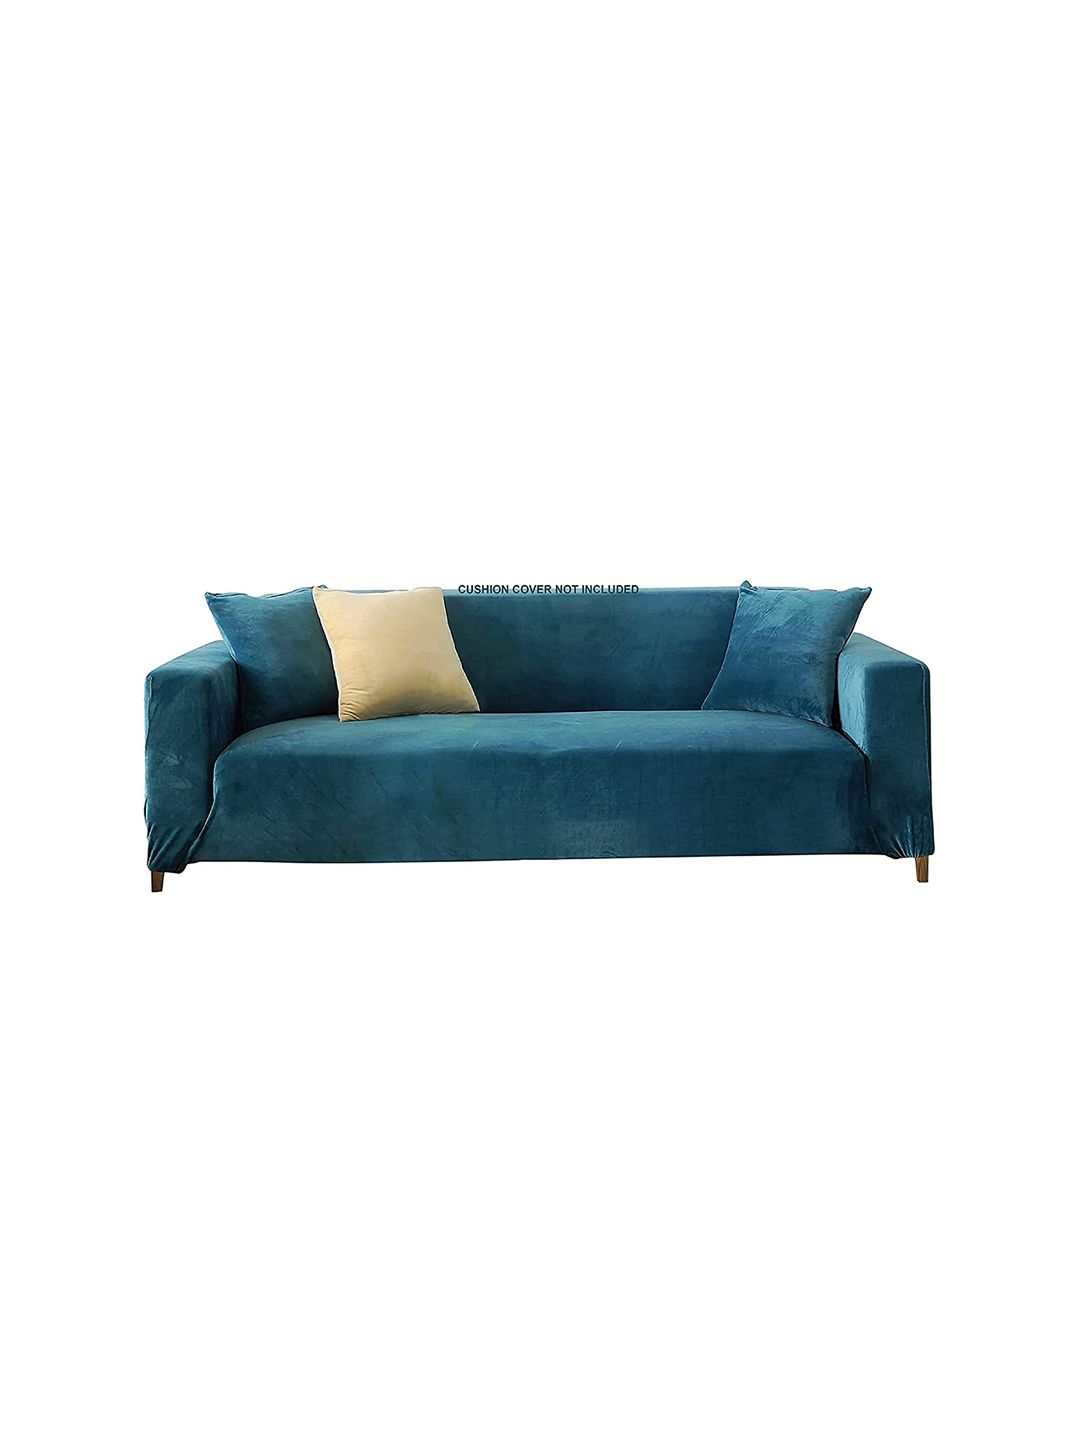 HOUSE OF QUIRK Teal Solid 1-Seater Stretchable Non-Slip Sofa Slipcover Price in India